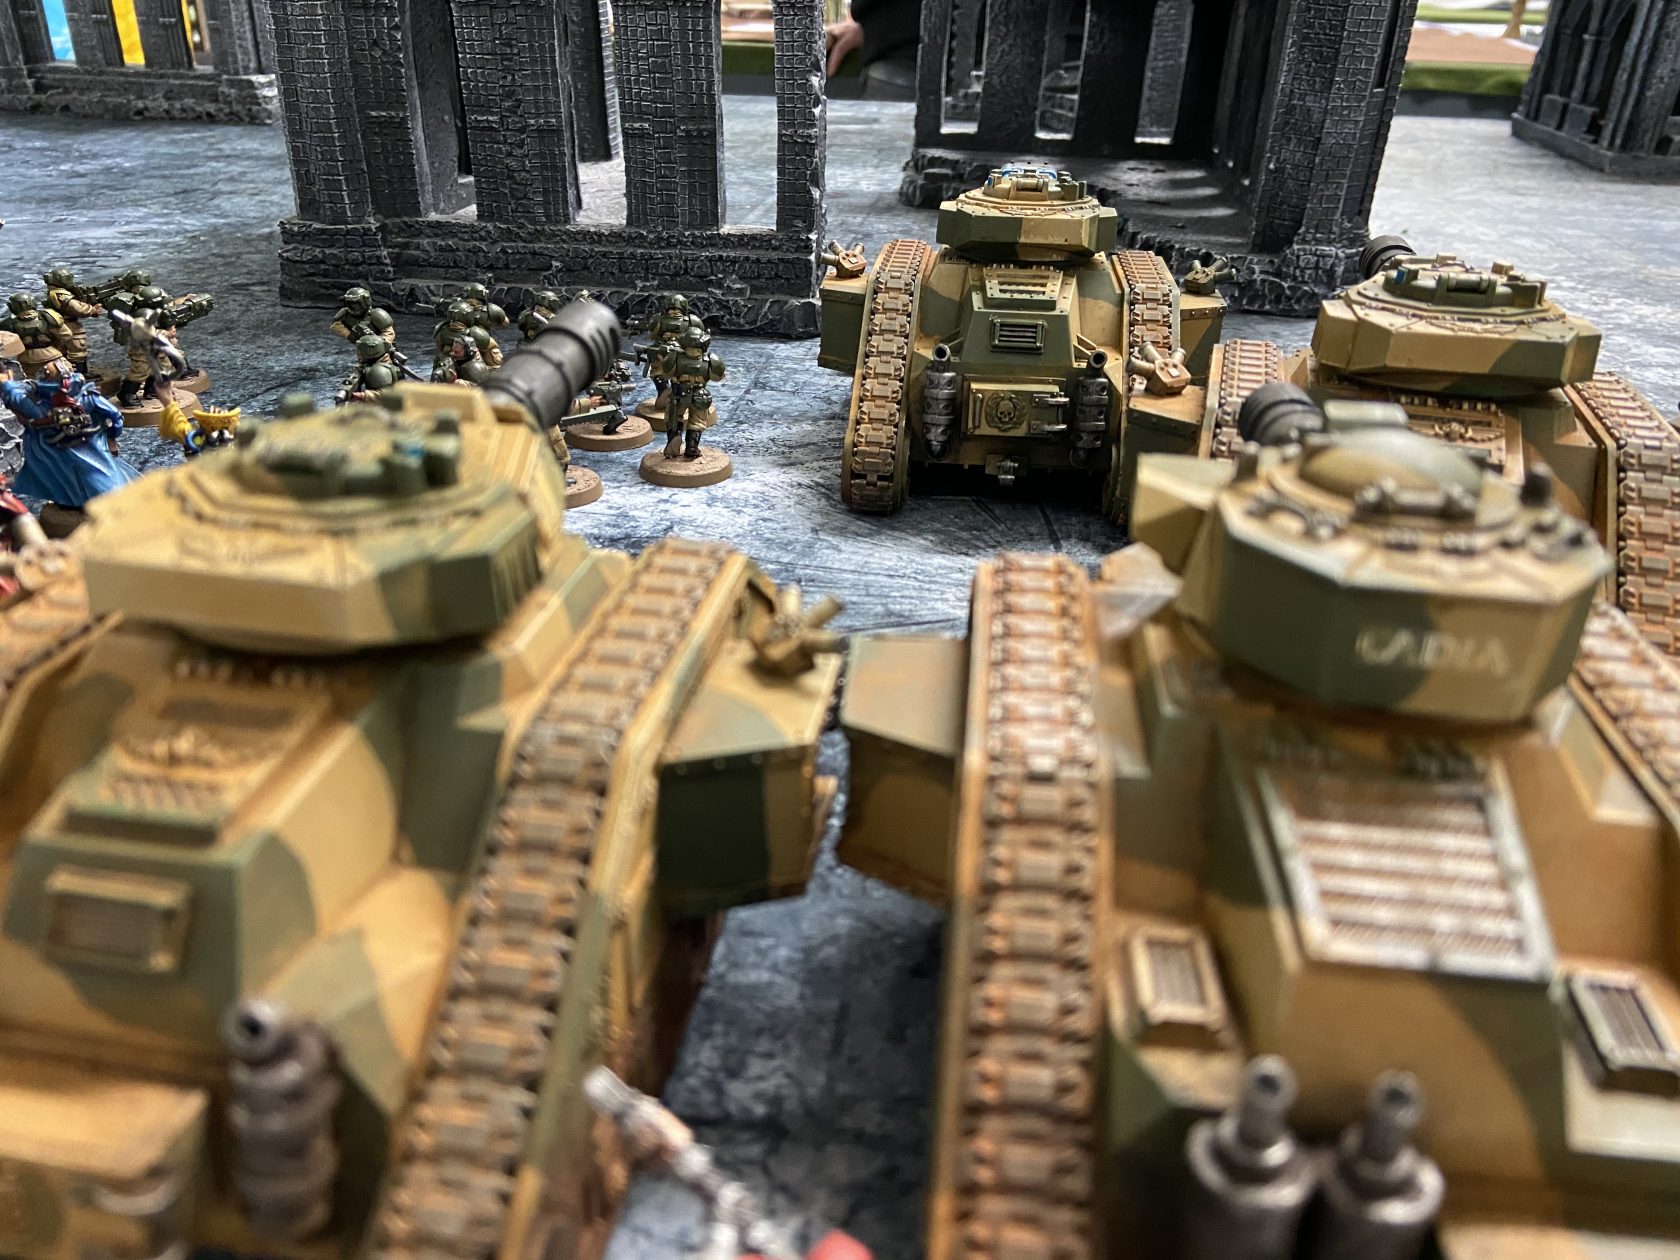 Cadians vs Death Guard - Chapter Approved 2019 - 1,750 points